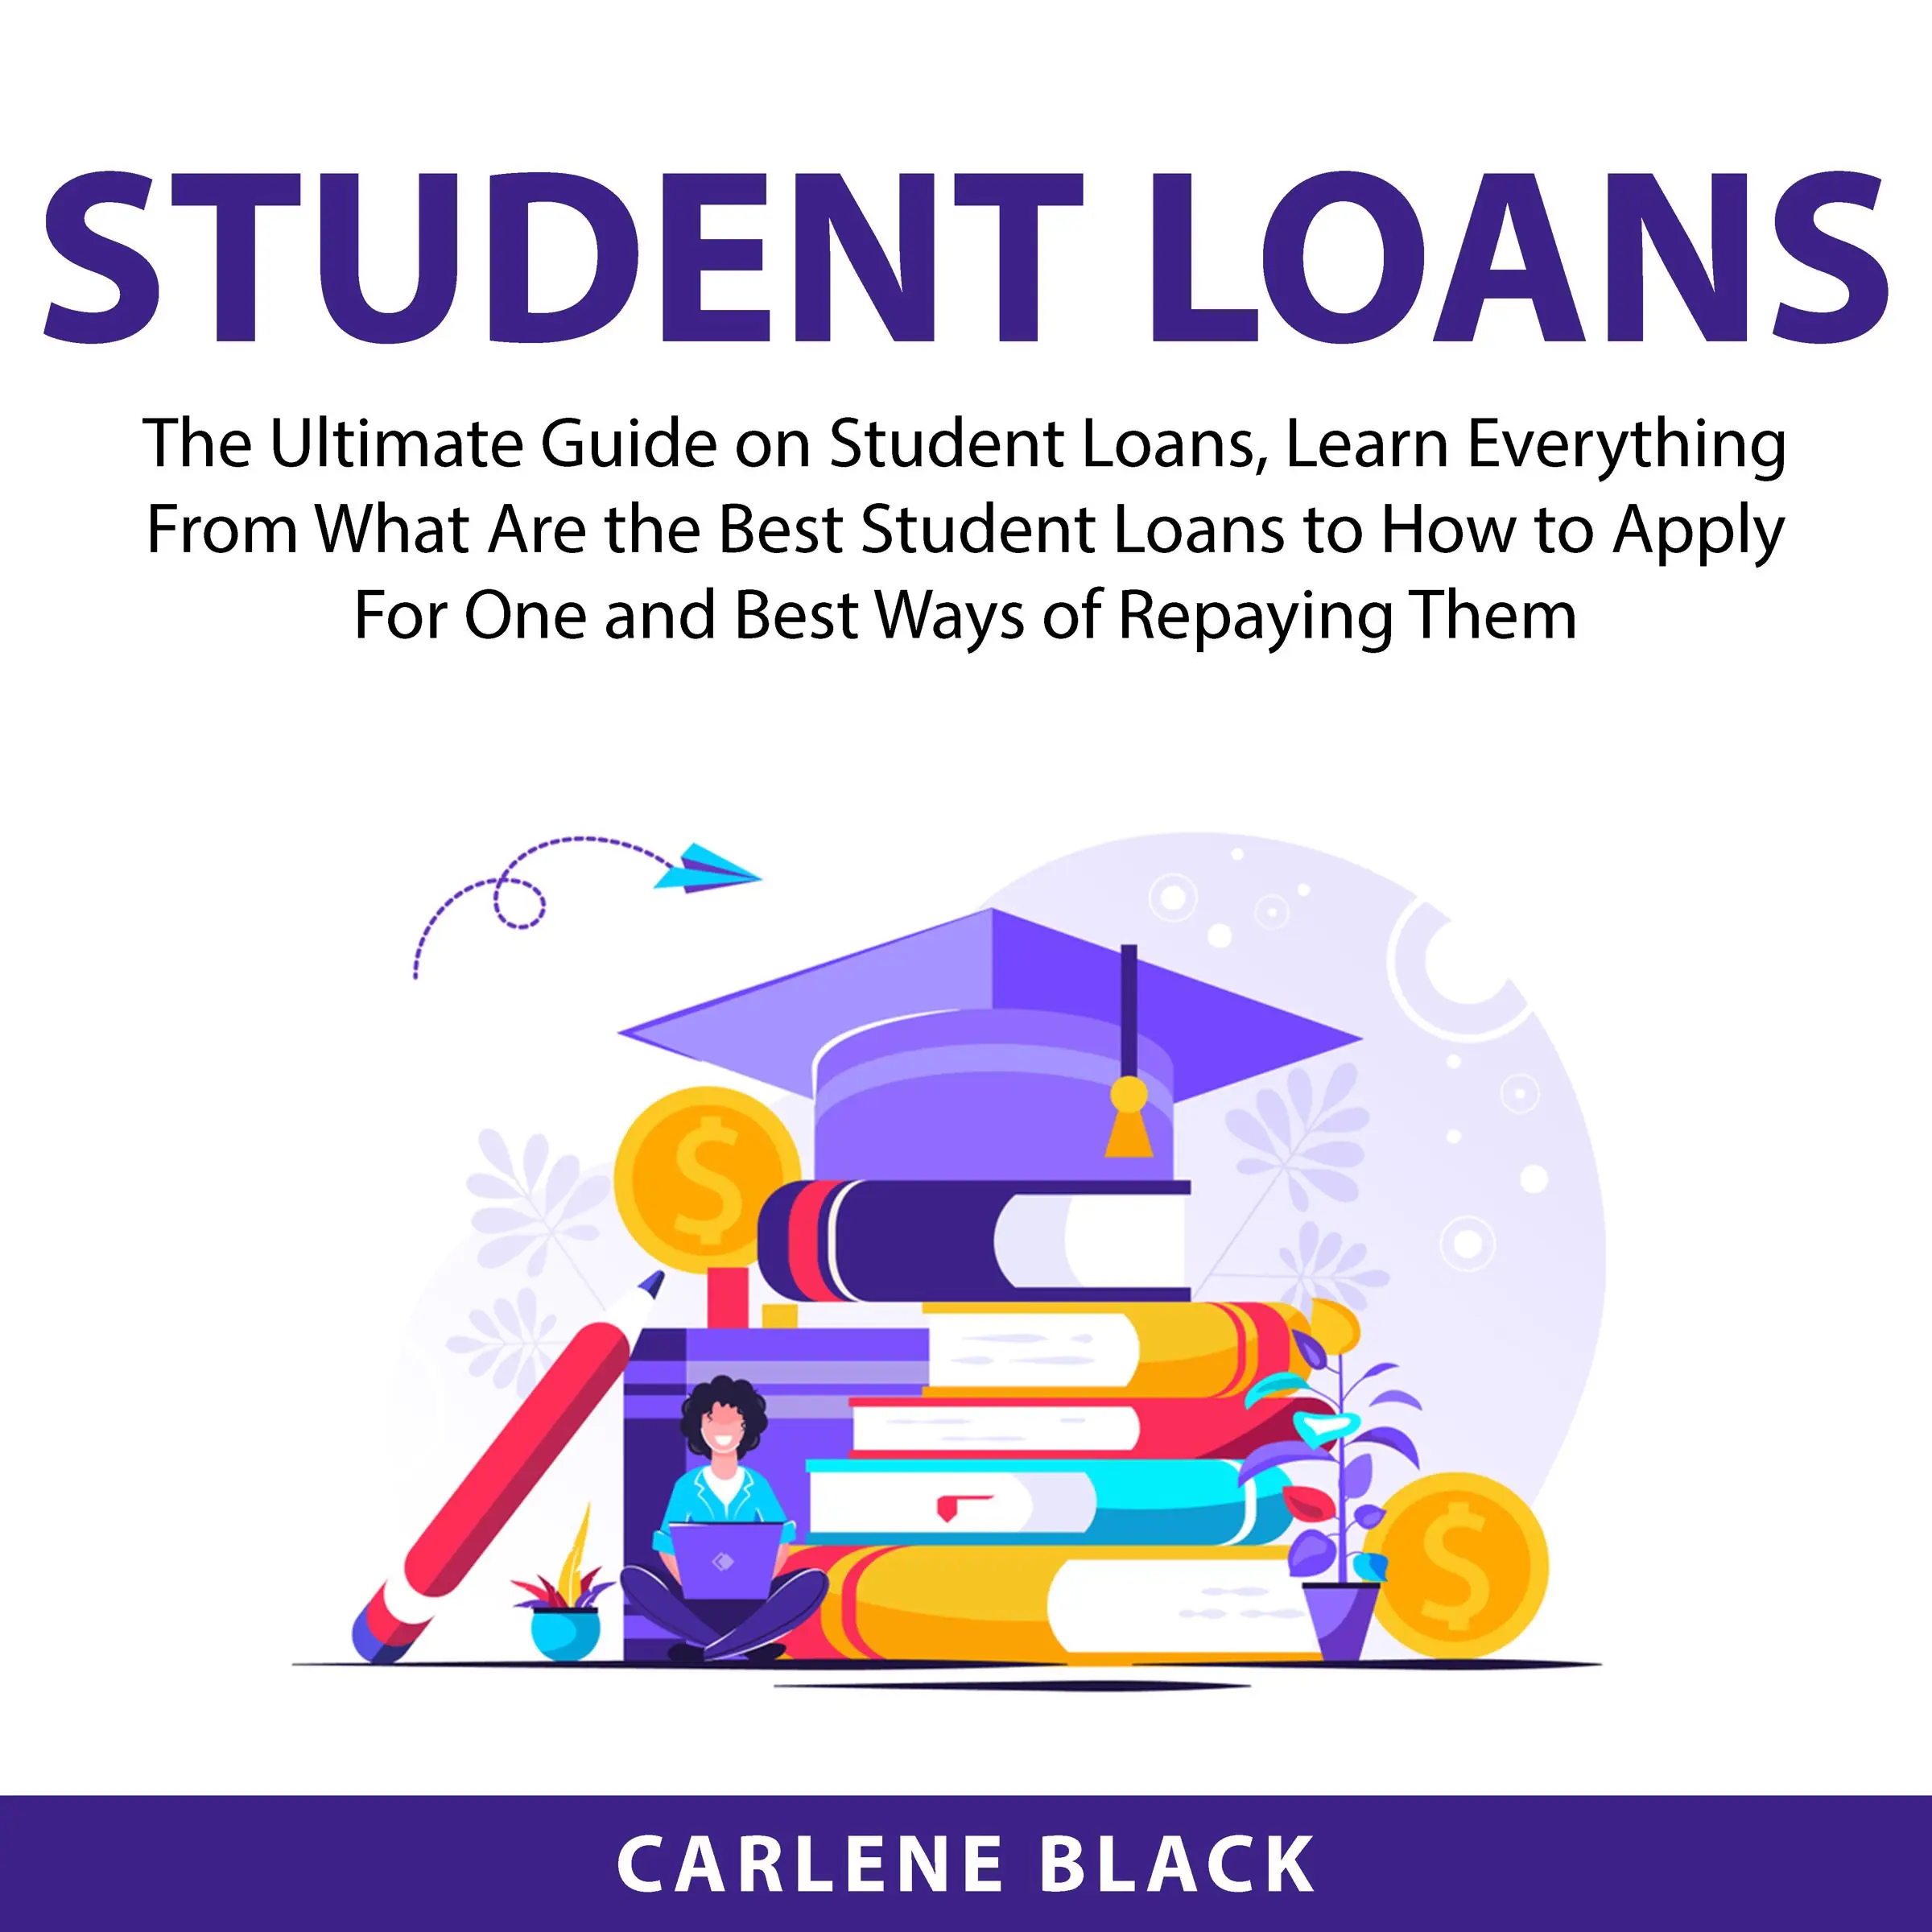 Student Loans: The Ultimate Guide on Student Loans, Learn Everything From What Are the Best Student Loans to How to Apply For One and Best Ways of Repaying Them Audiobook by Carlene Black